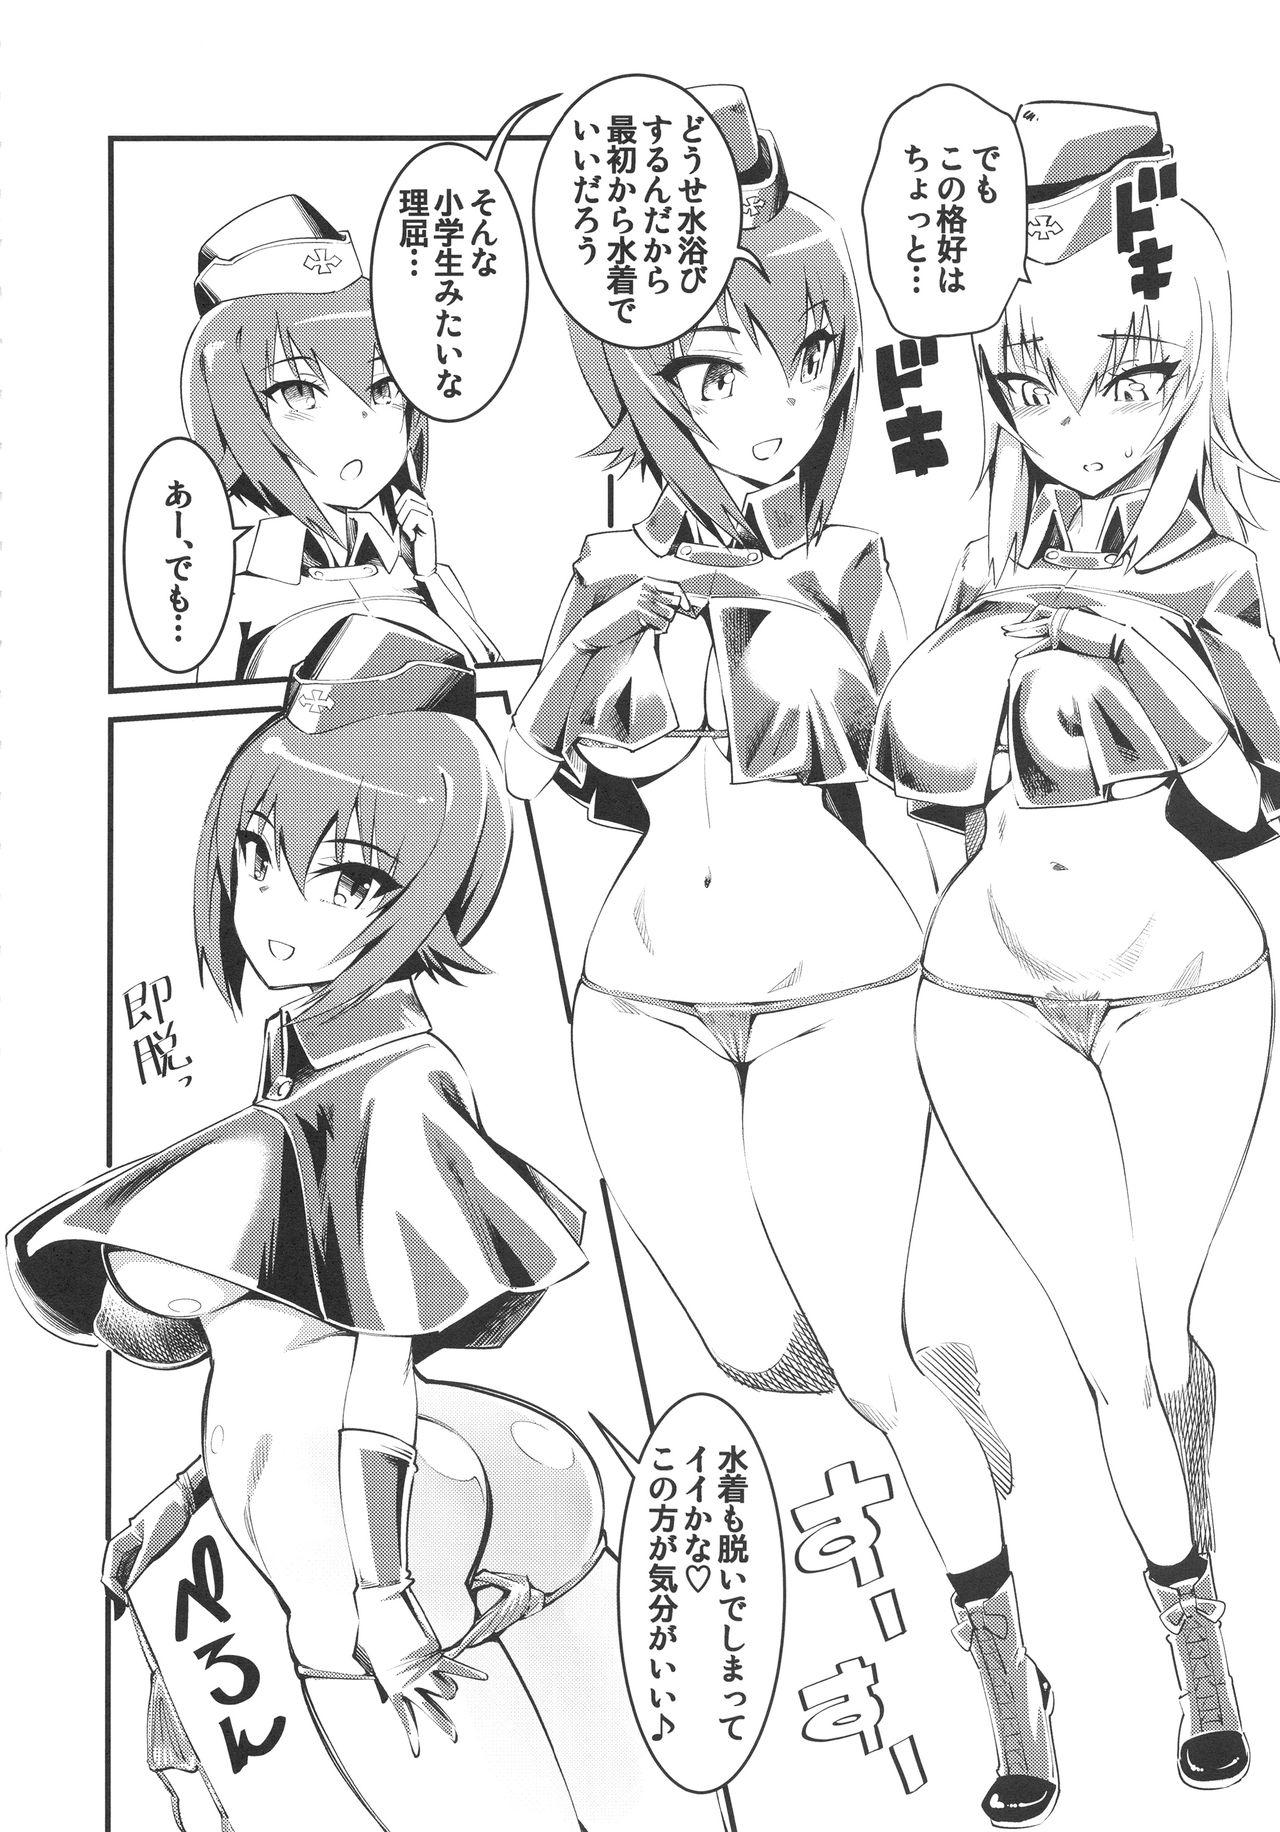 Gaydudes GIRLS and CAMPER and NUDIST - Girls und panzer Soapy - Page 3